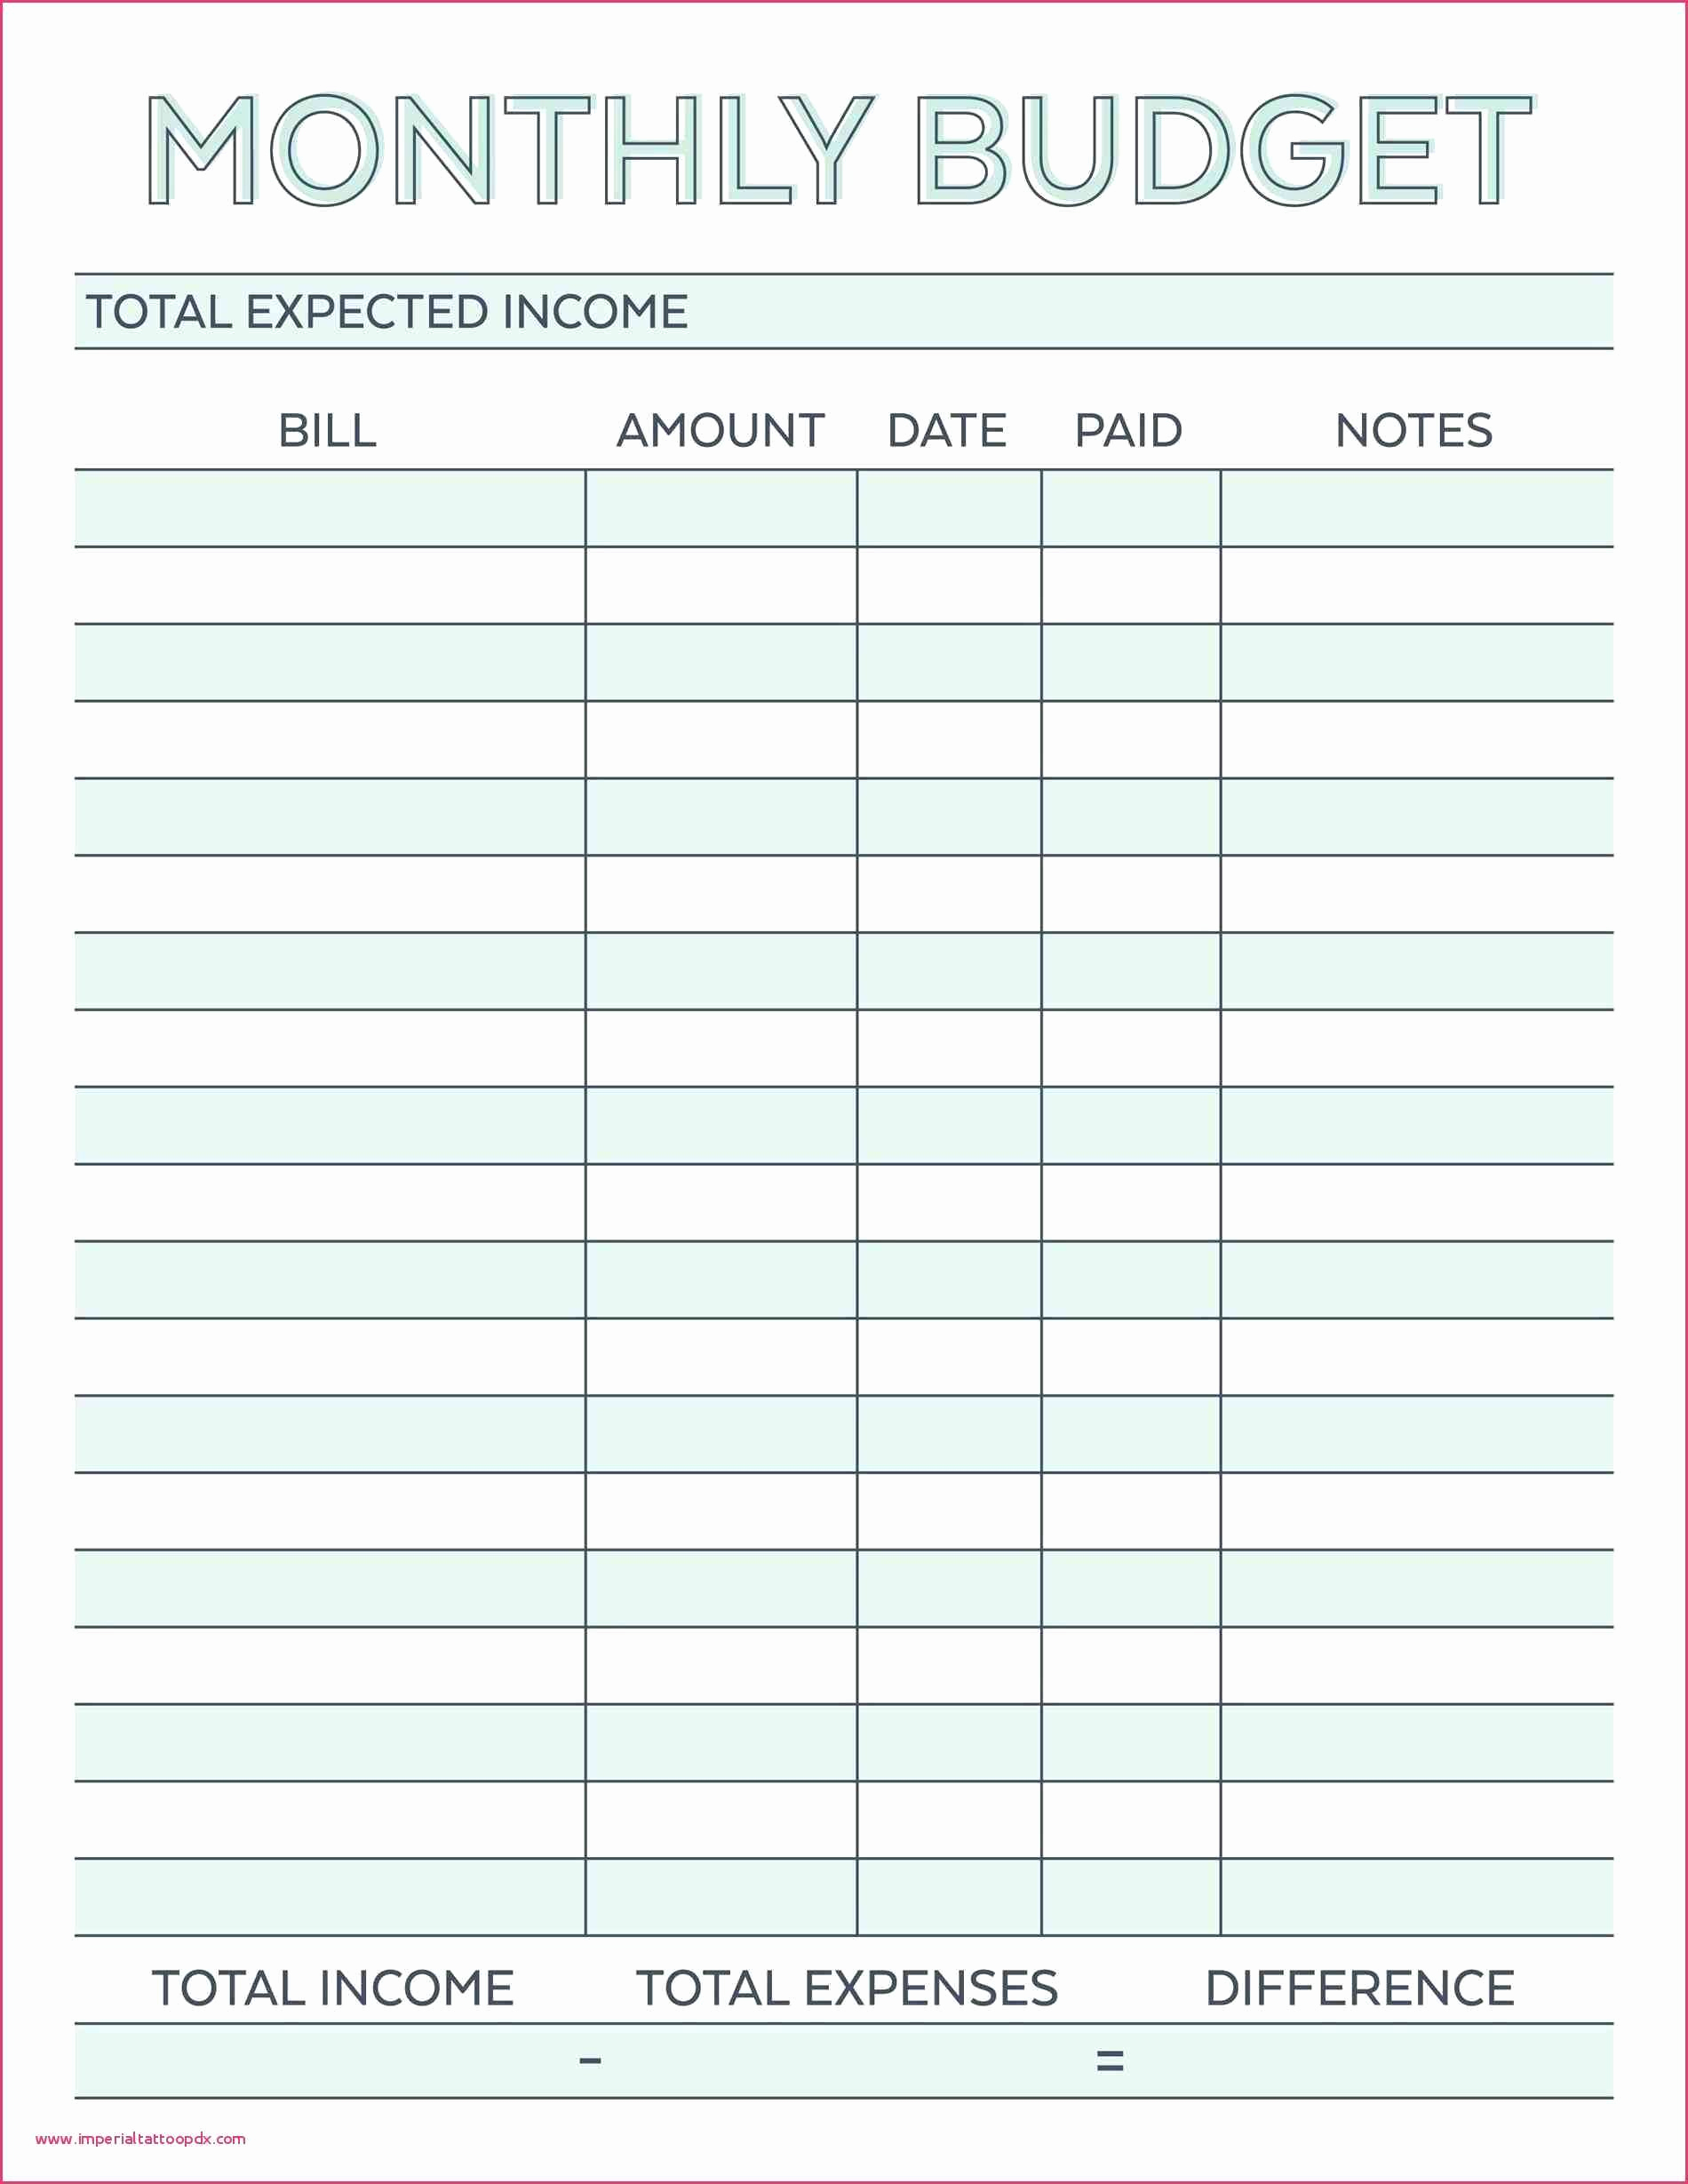 daycare-expense-spreadsheet-within-child-care-center-budget-template-lovely-child-worksheet